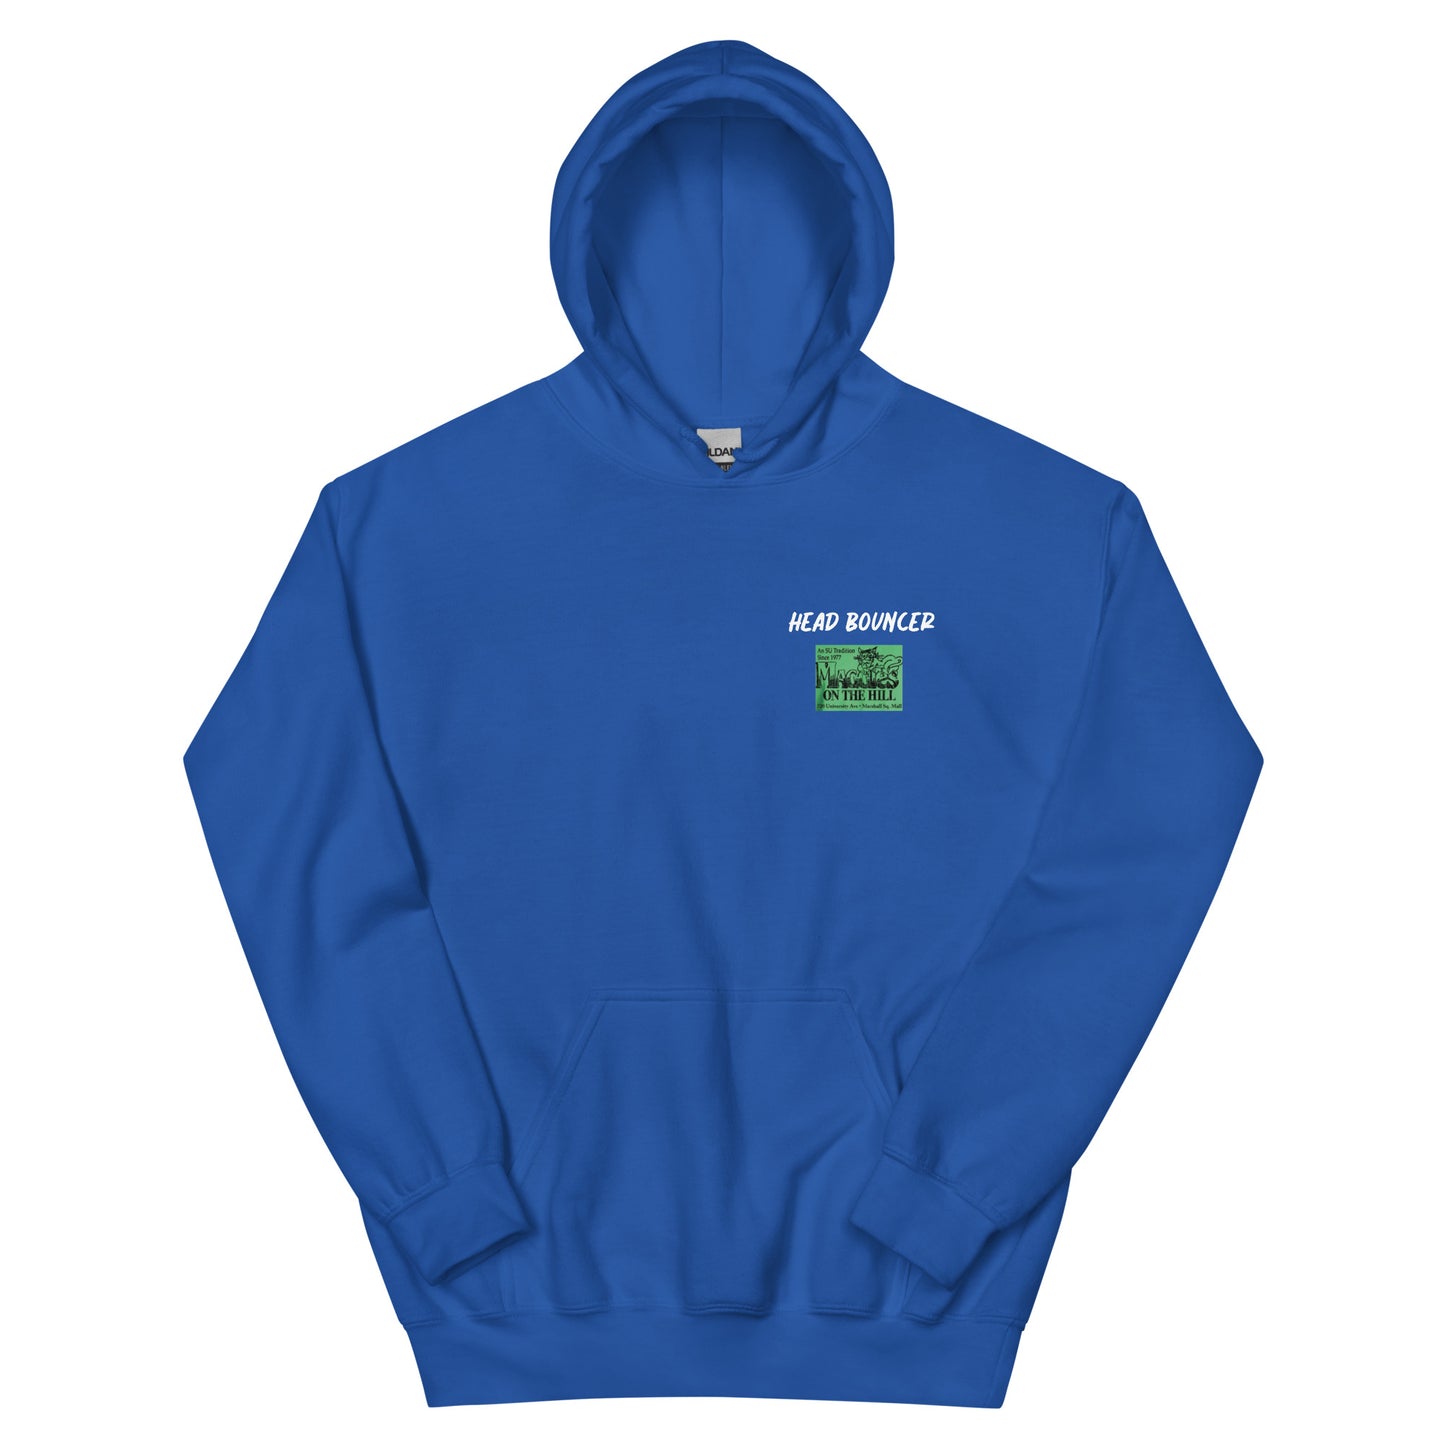 Best men's royal blue sweatshirt graphic hoodie with warm pouch